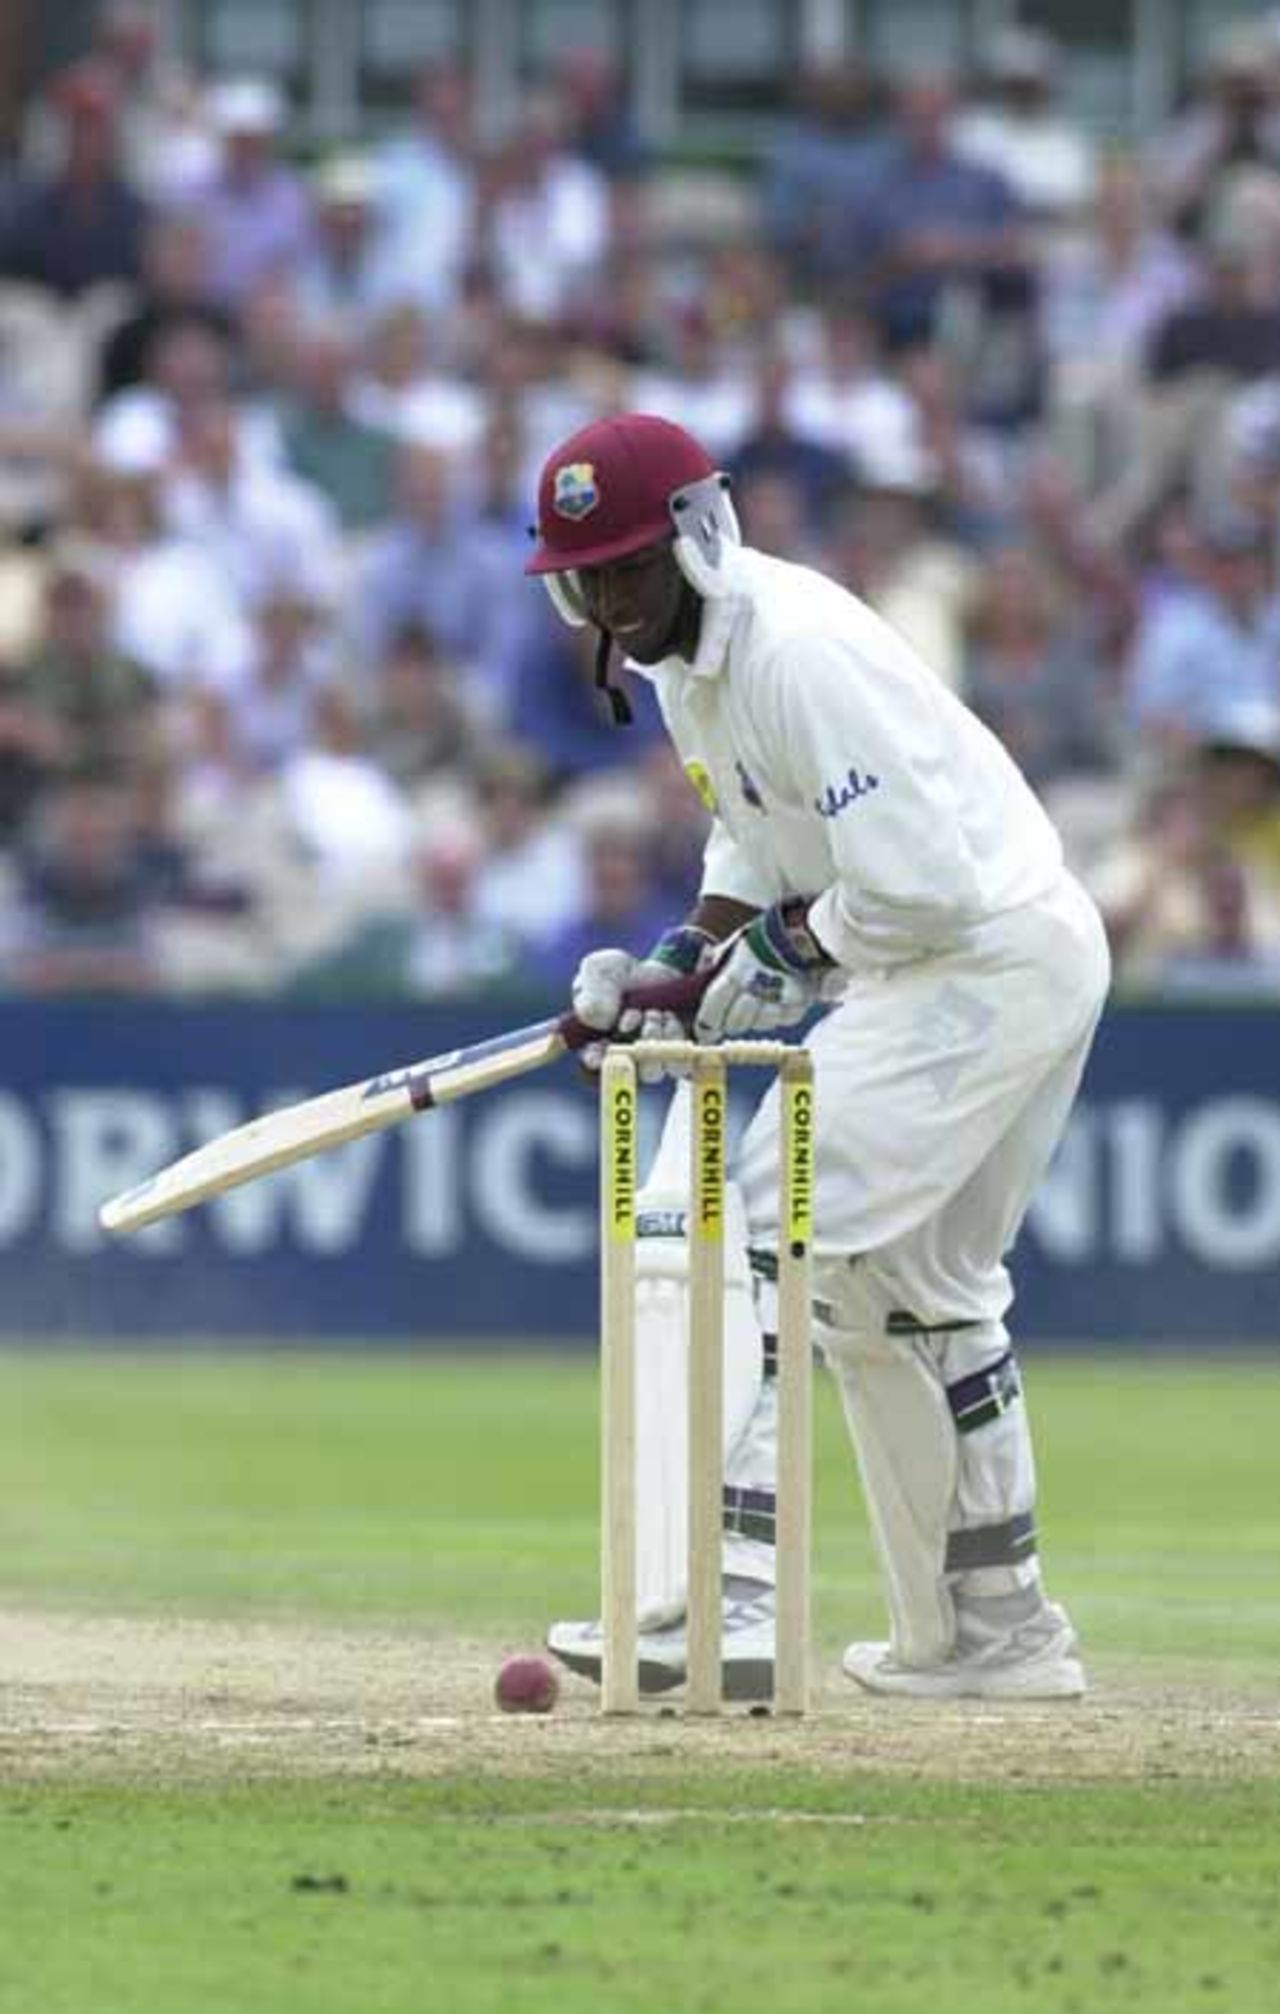 Third Test of England v West Indies at Old Trafford, 2000